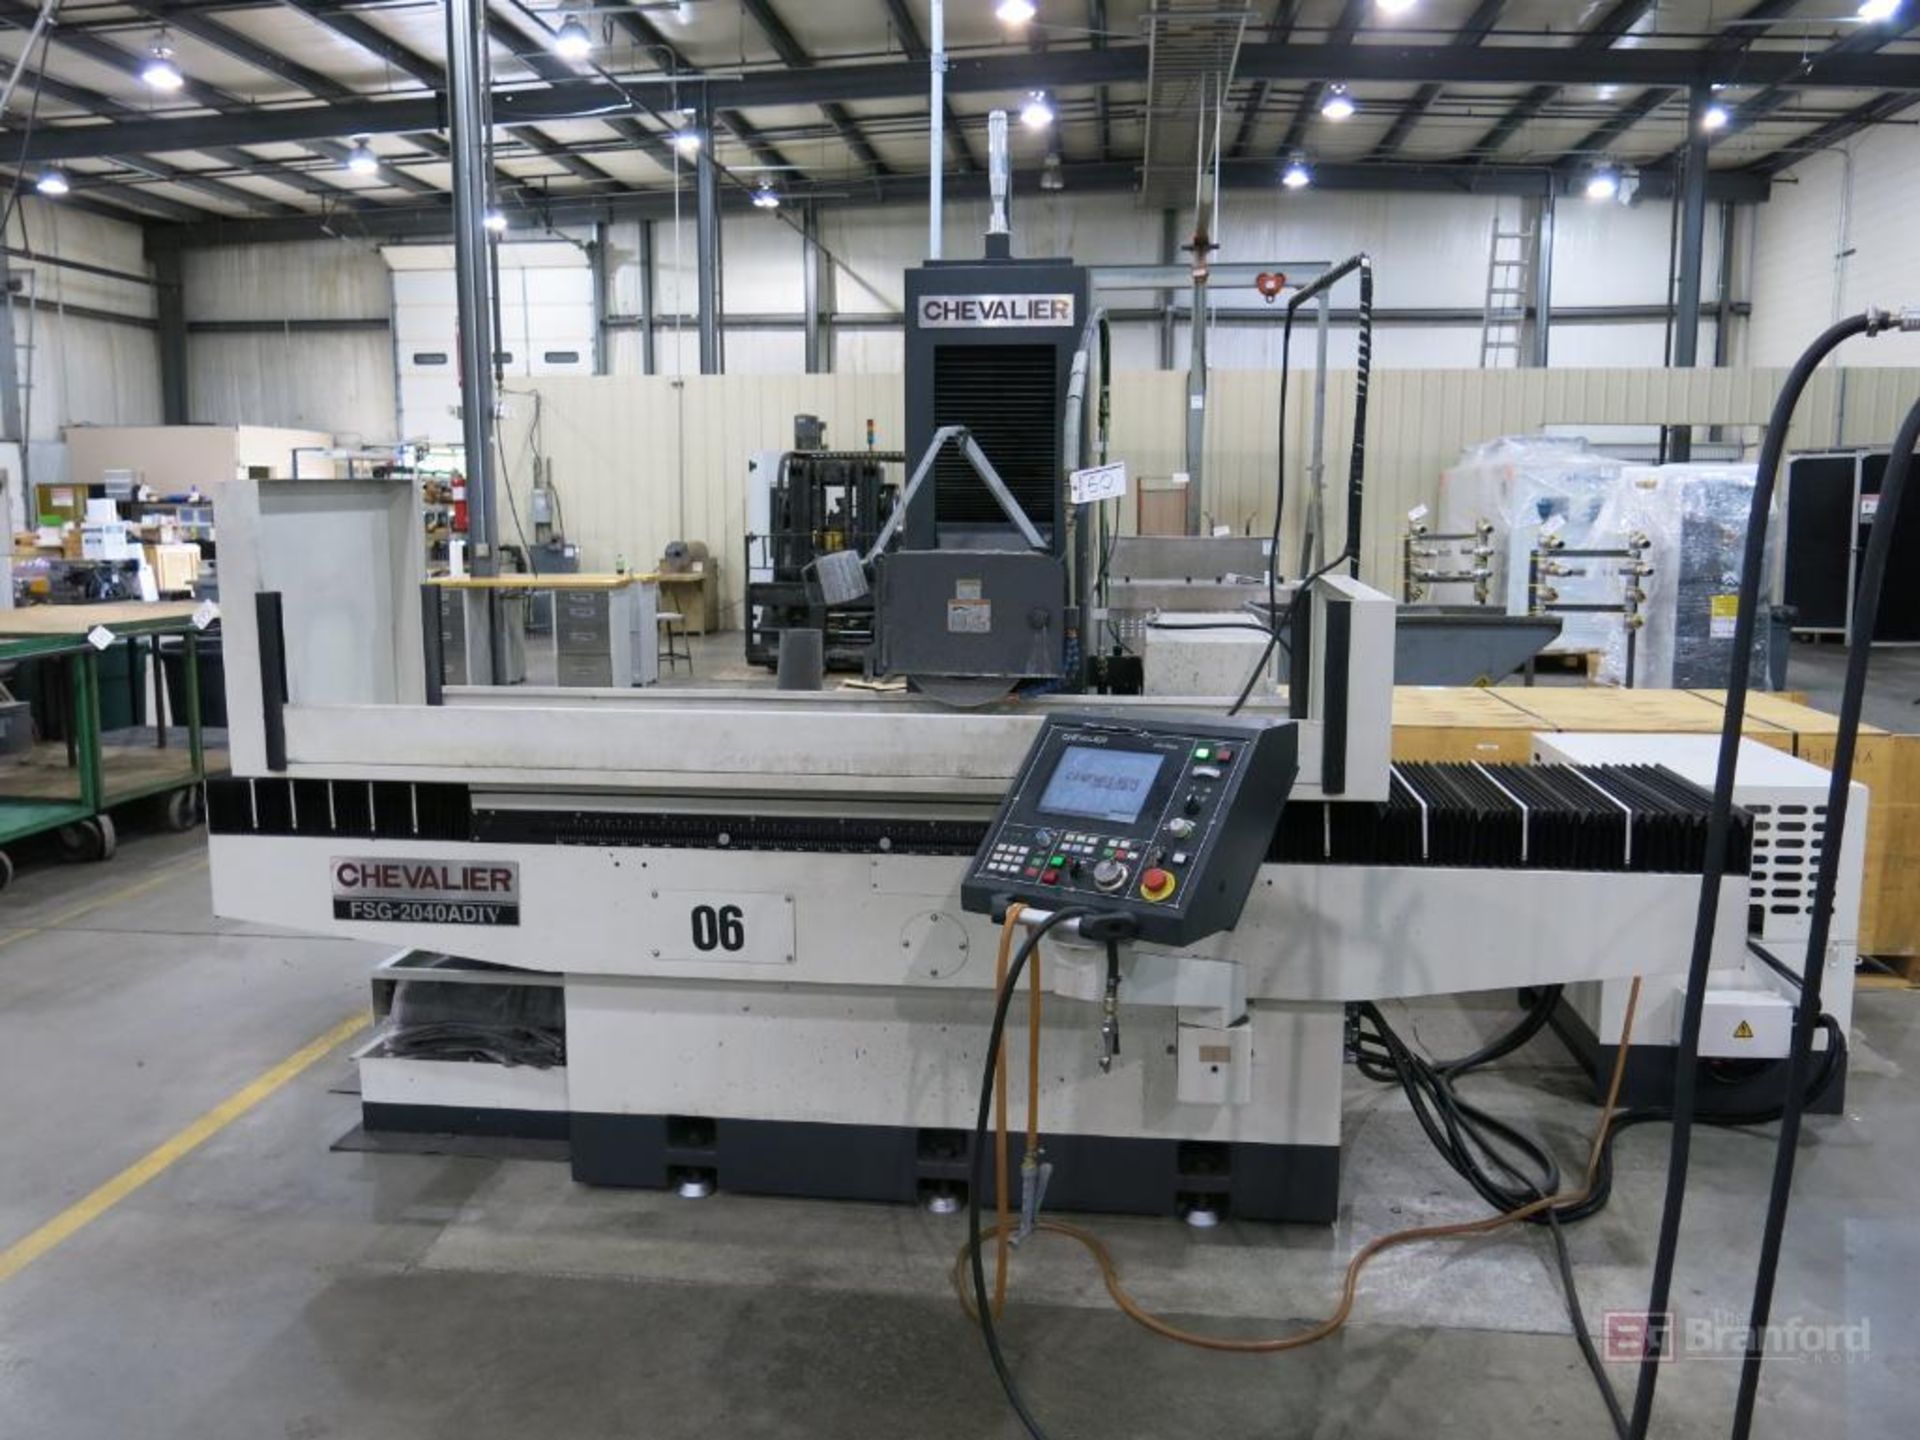 Chevalier Model FSG-2040ADIV Surface Grinder w/ 20" x 40" Magnetic Chuck - Image 3 of 10